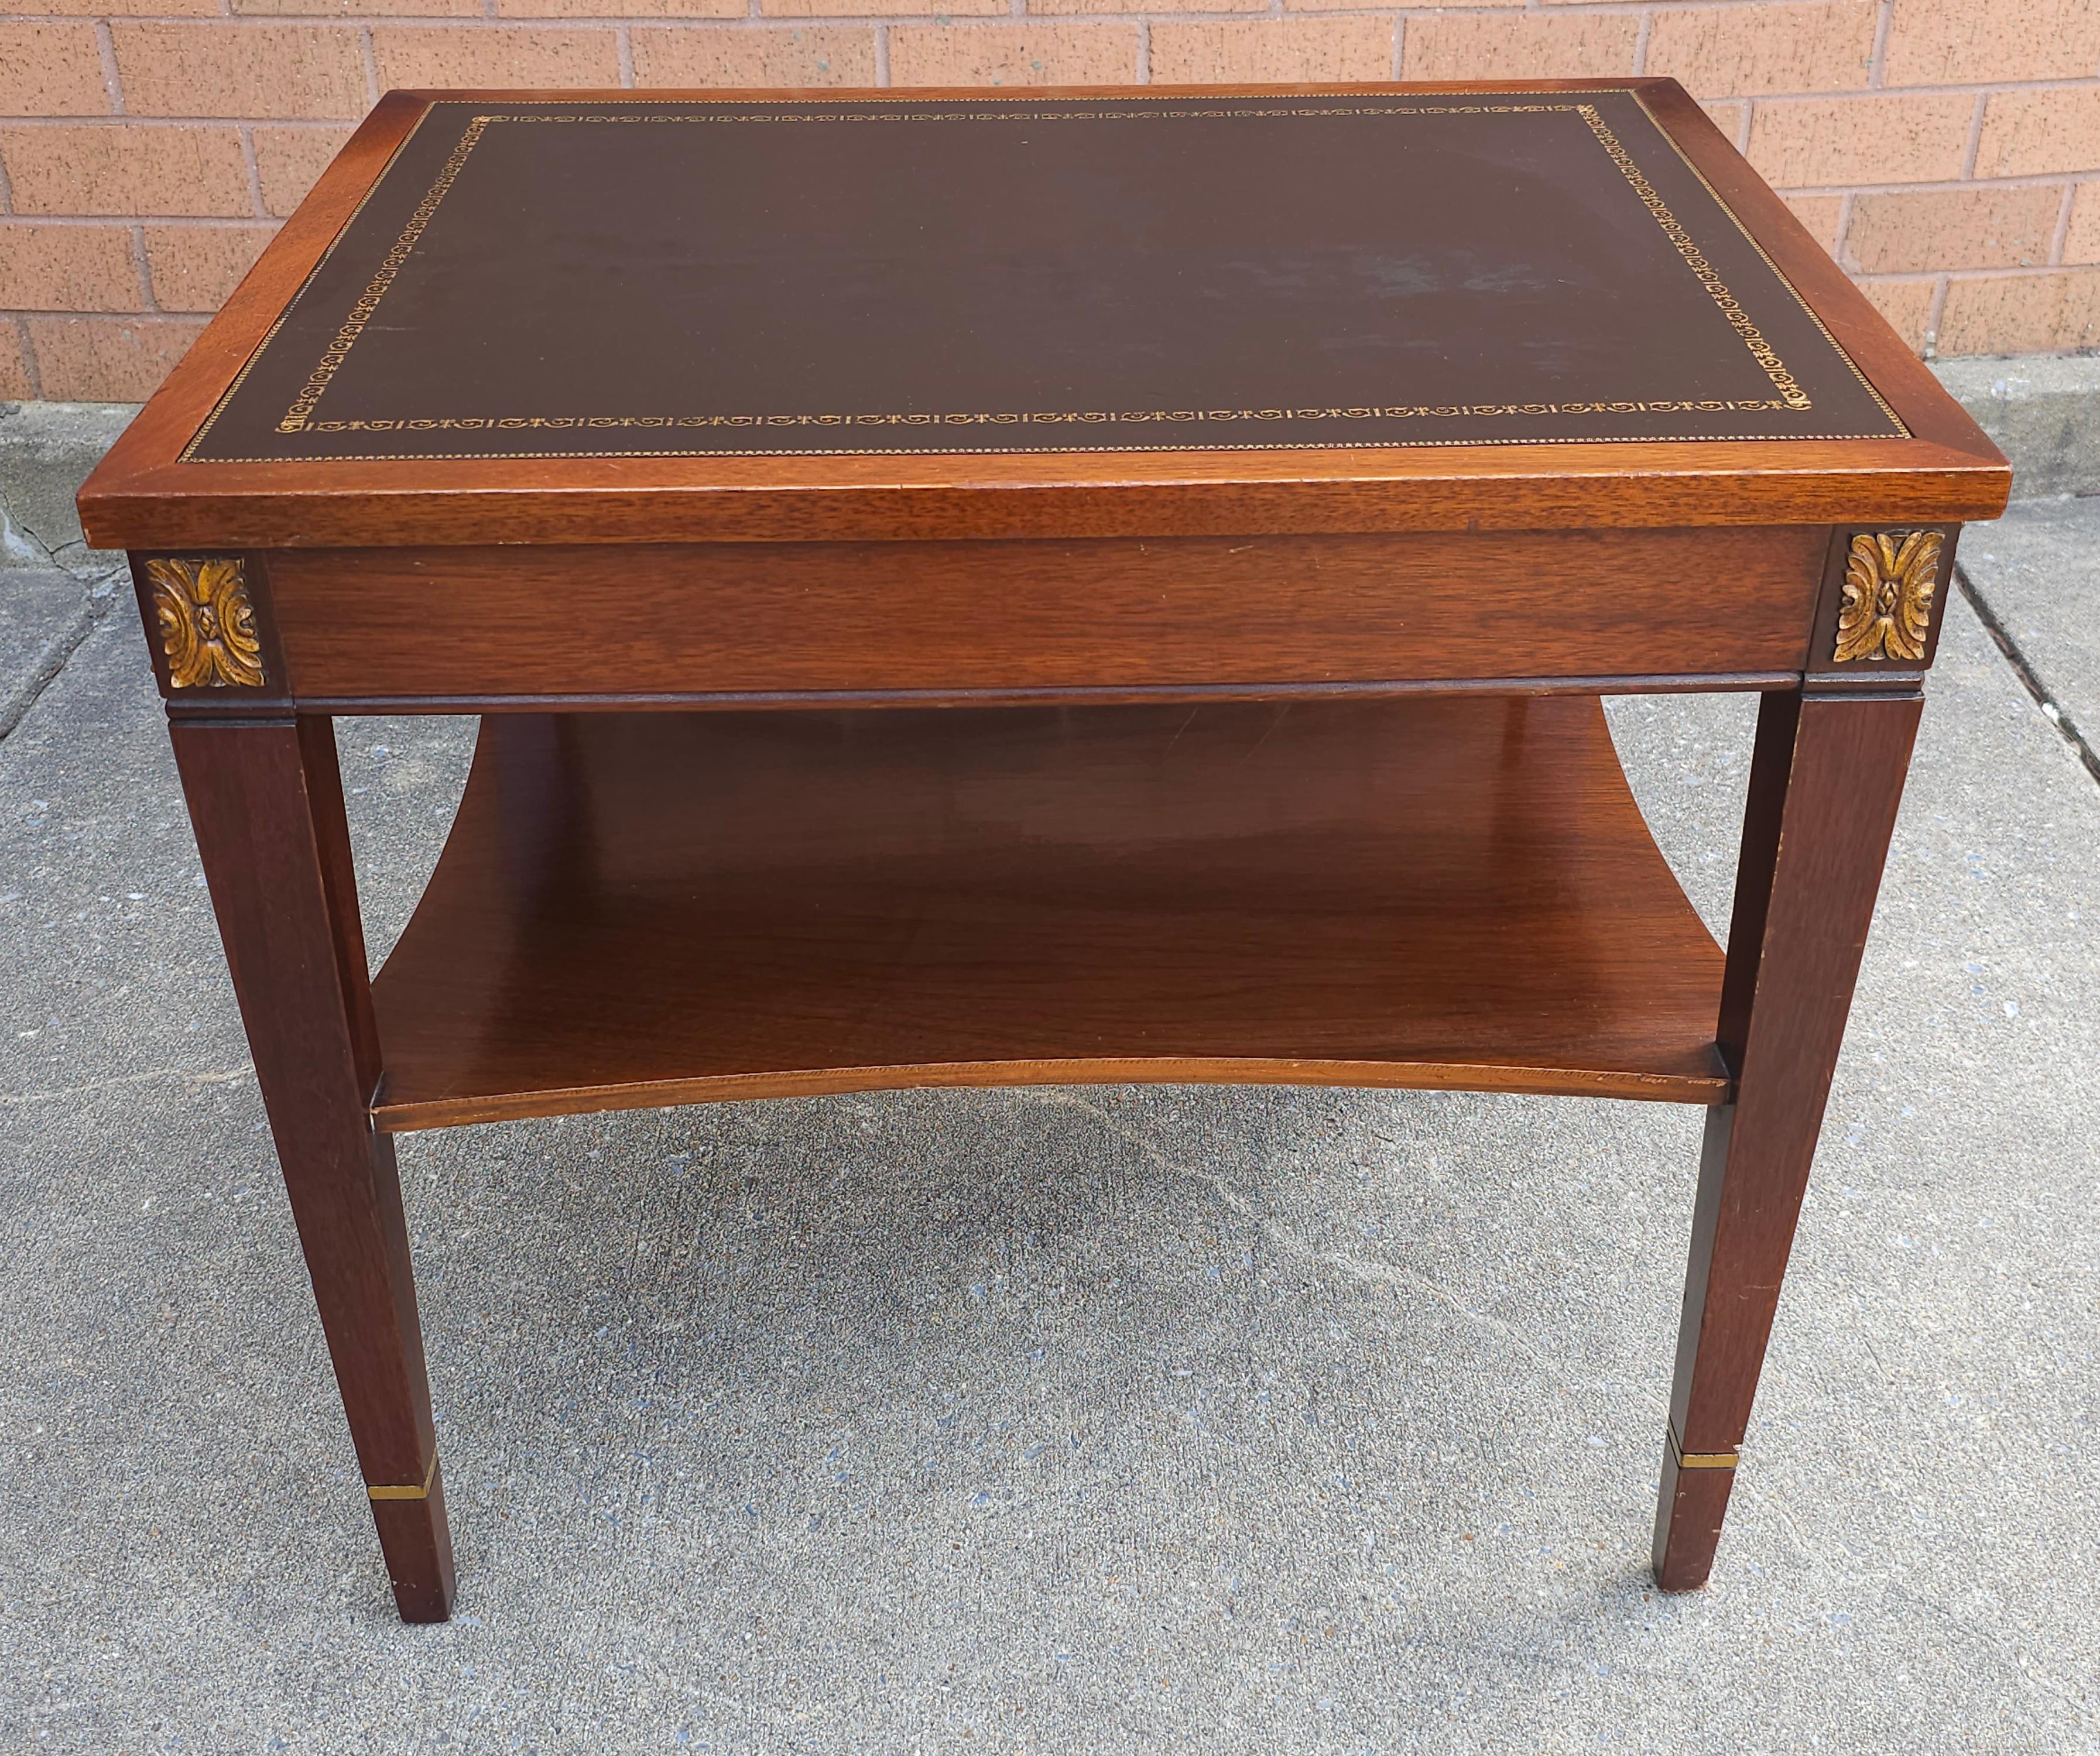 Regency Brandt Furniture Partial Gilt And Tooled Leather Mahogany Tiered Side Table For Sale